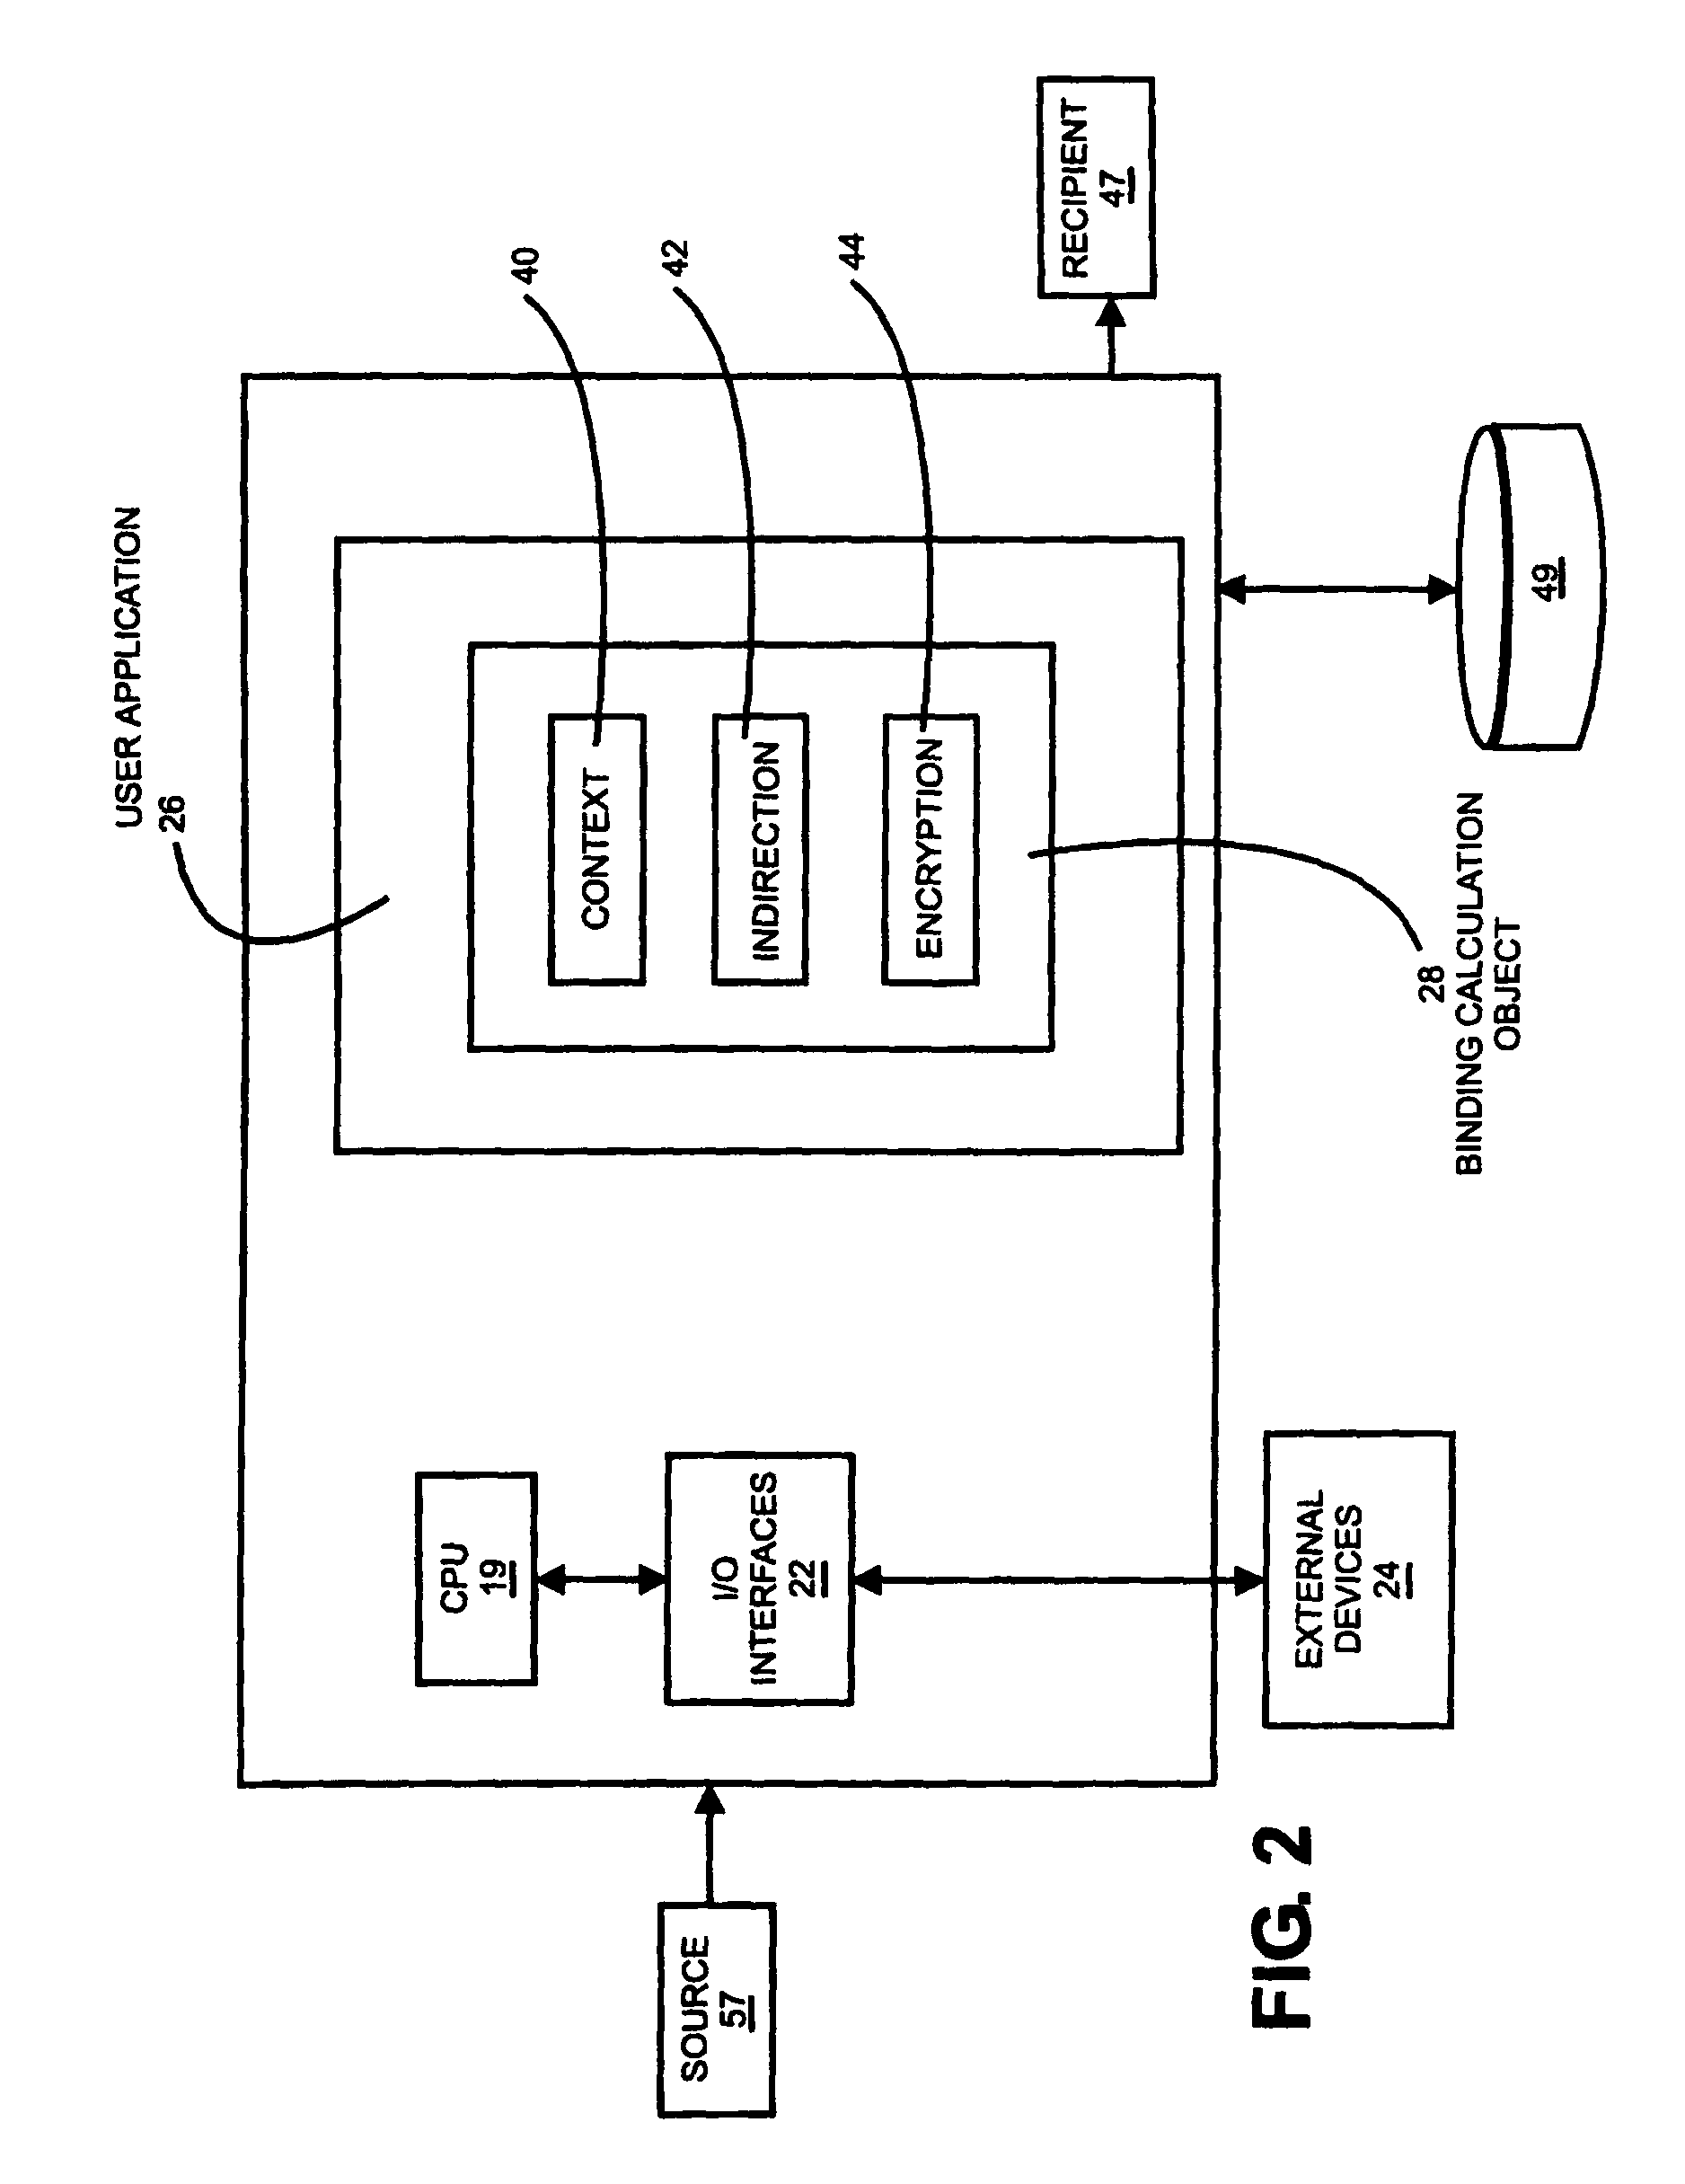 System and method for managing encrypted content using logical partitions